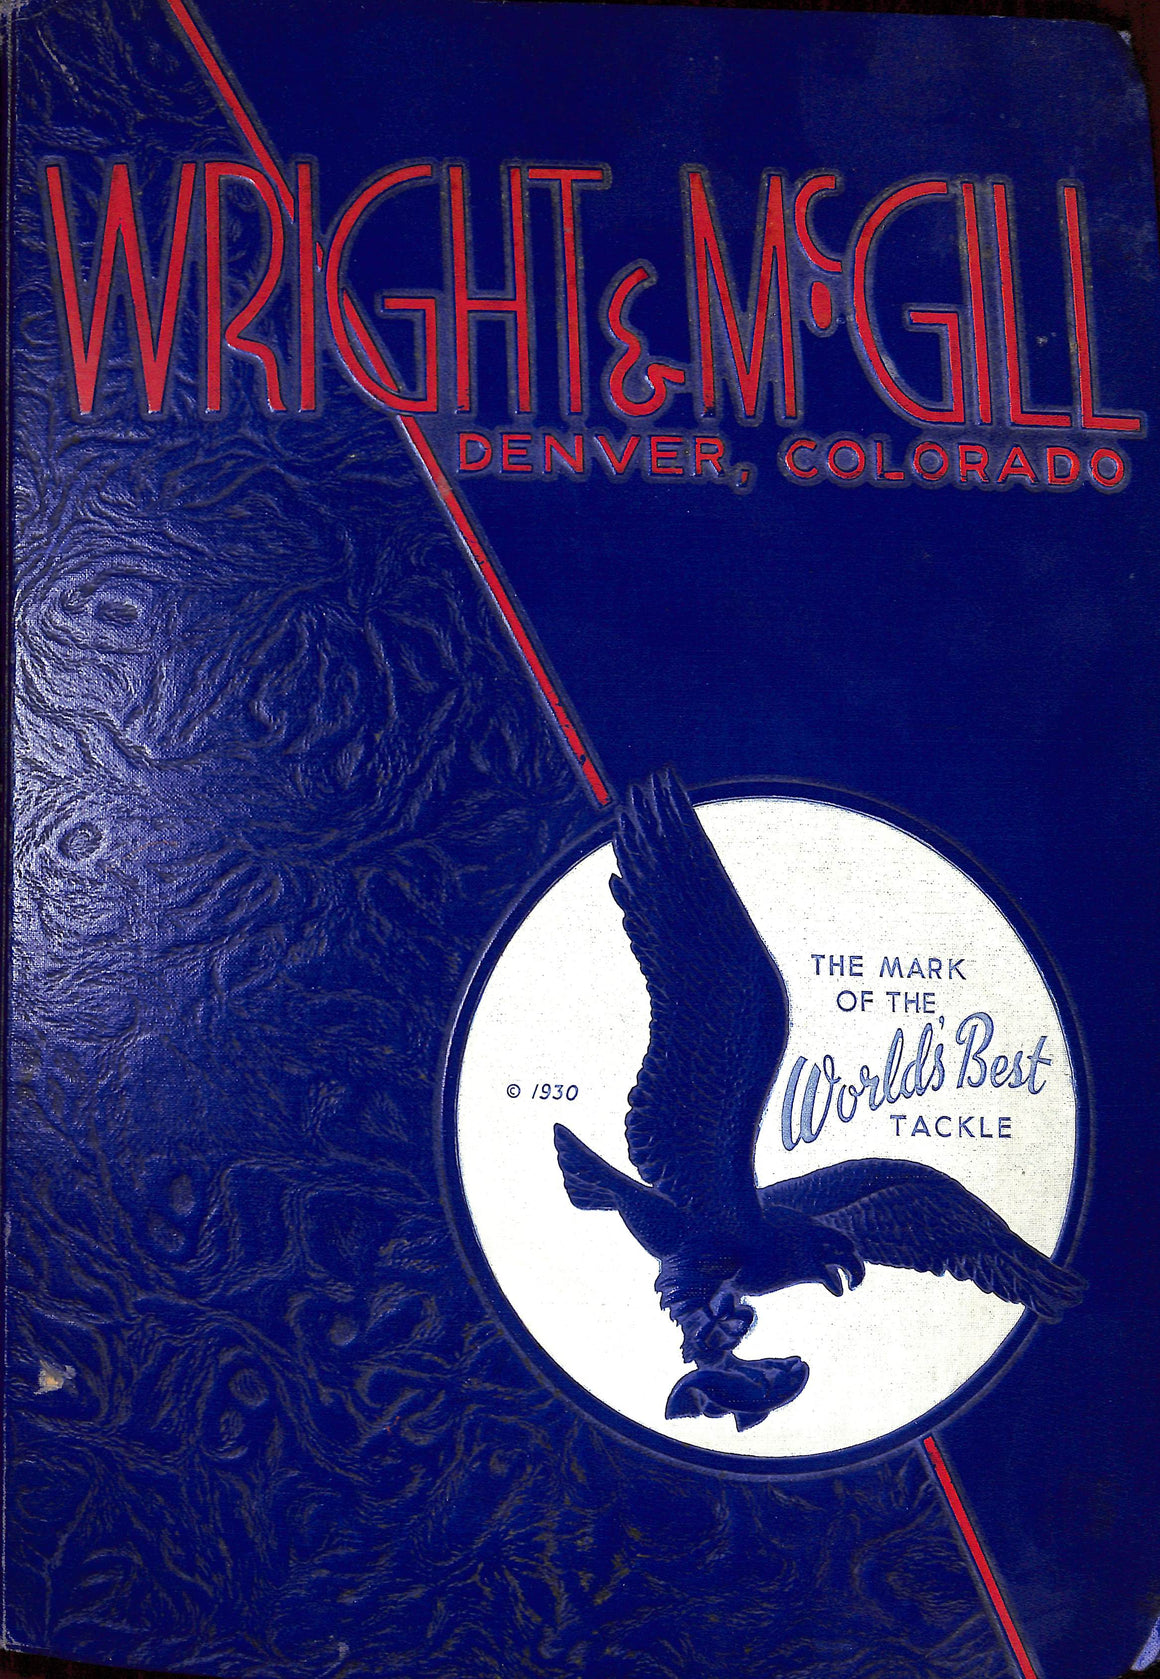 "Wright & McGill: The Mark of The World's Best Tackle"